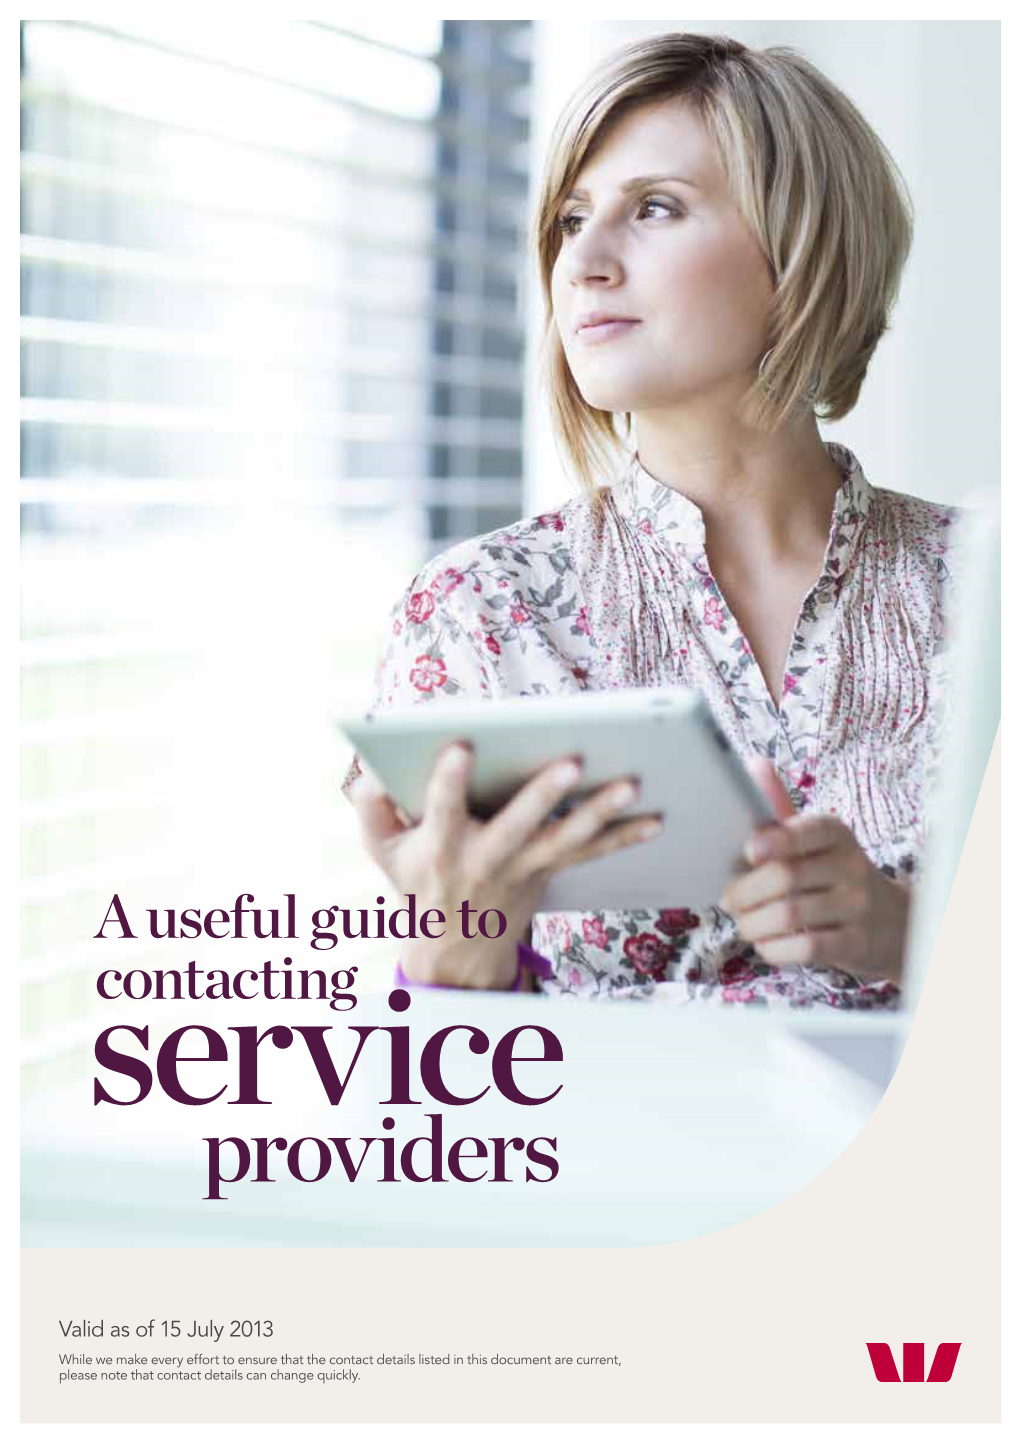 Guide to Contacting Service Providers